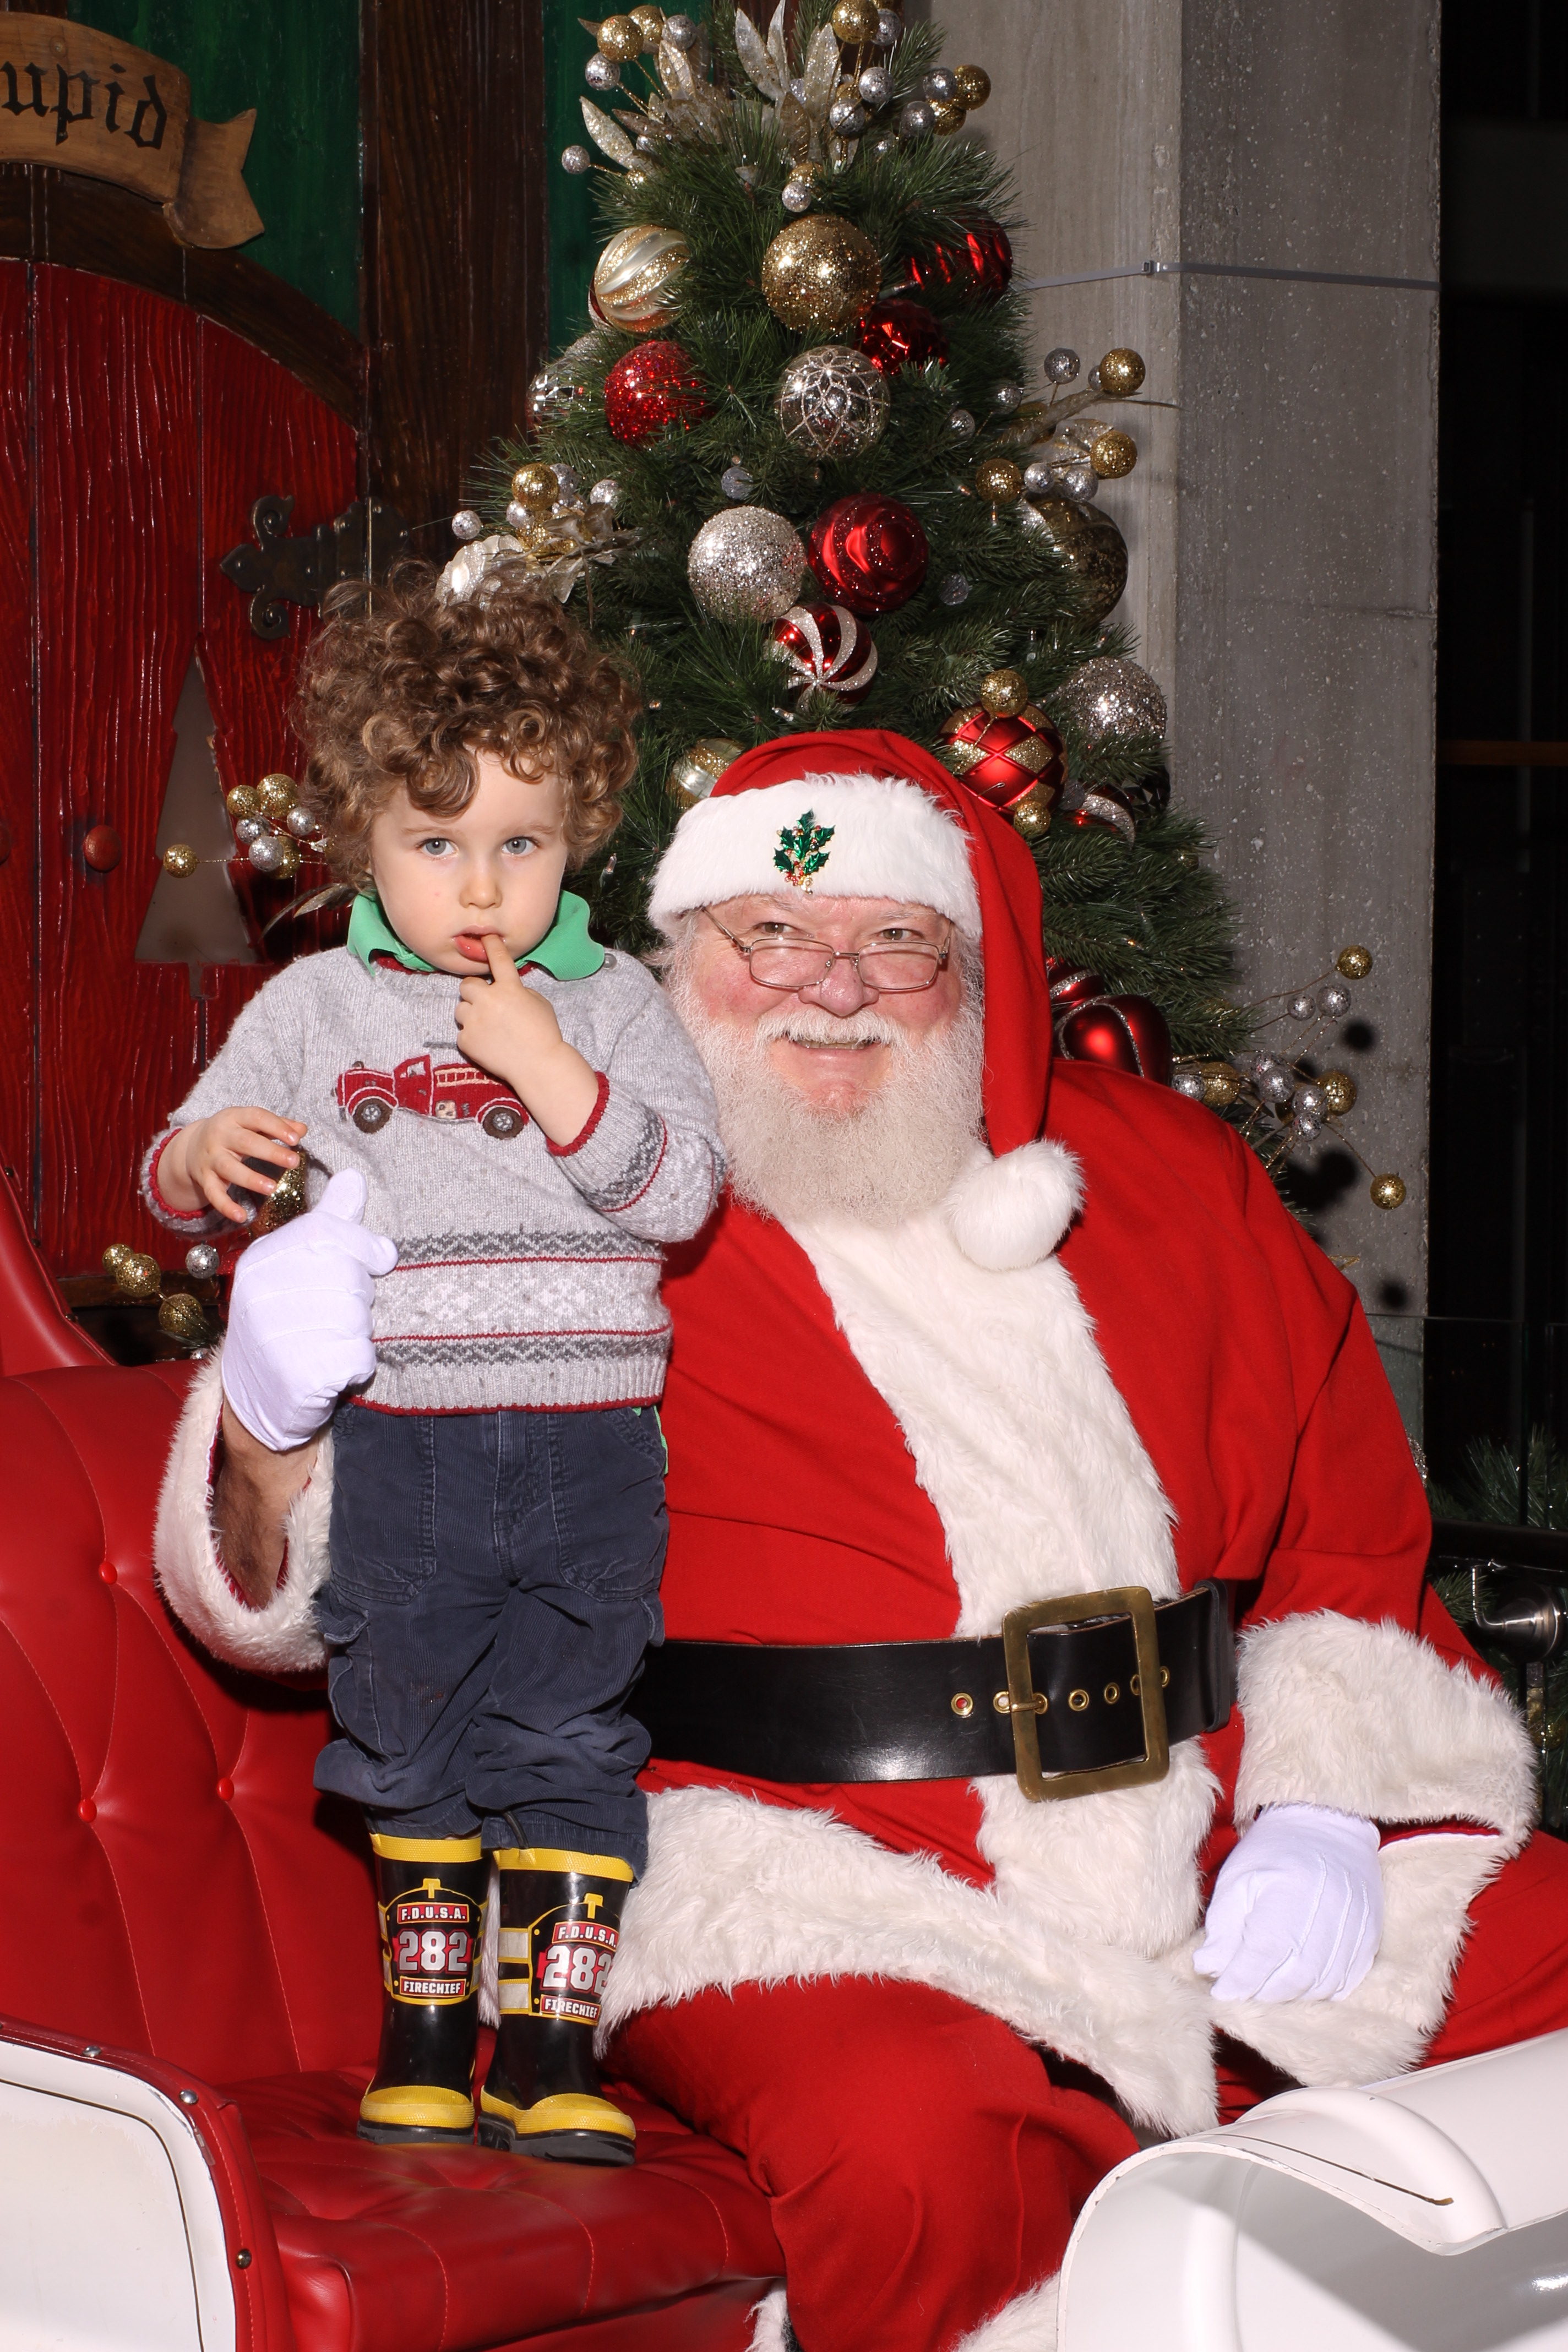 A two year old child looks slightly scared next to Santa's lap.